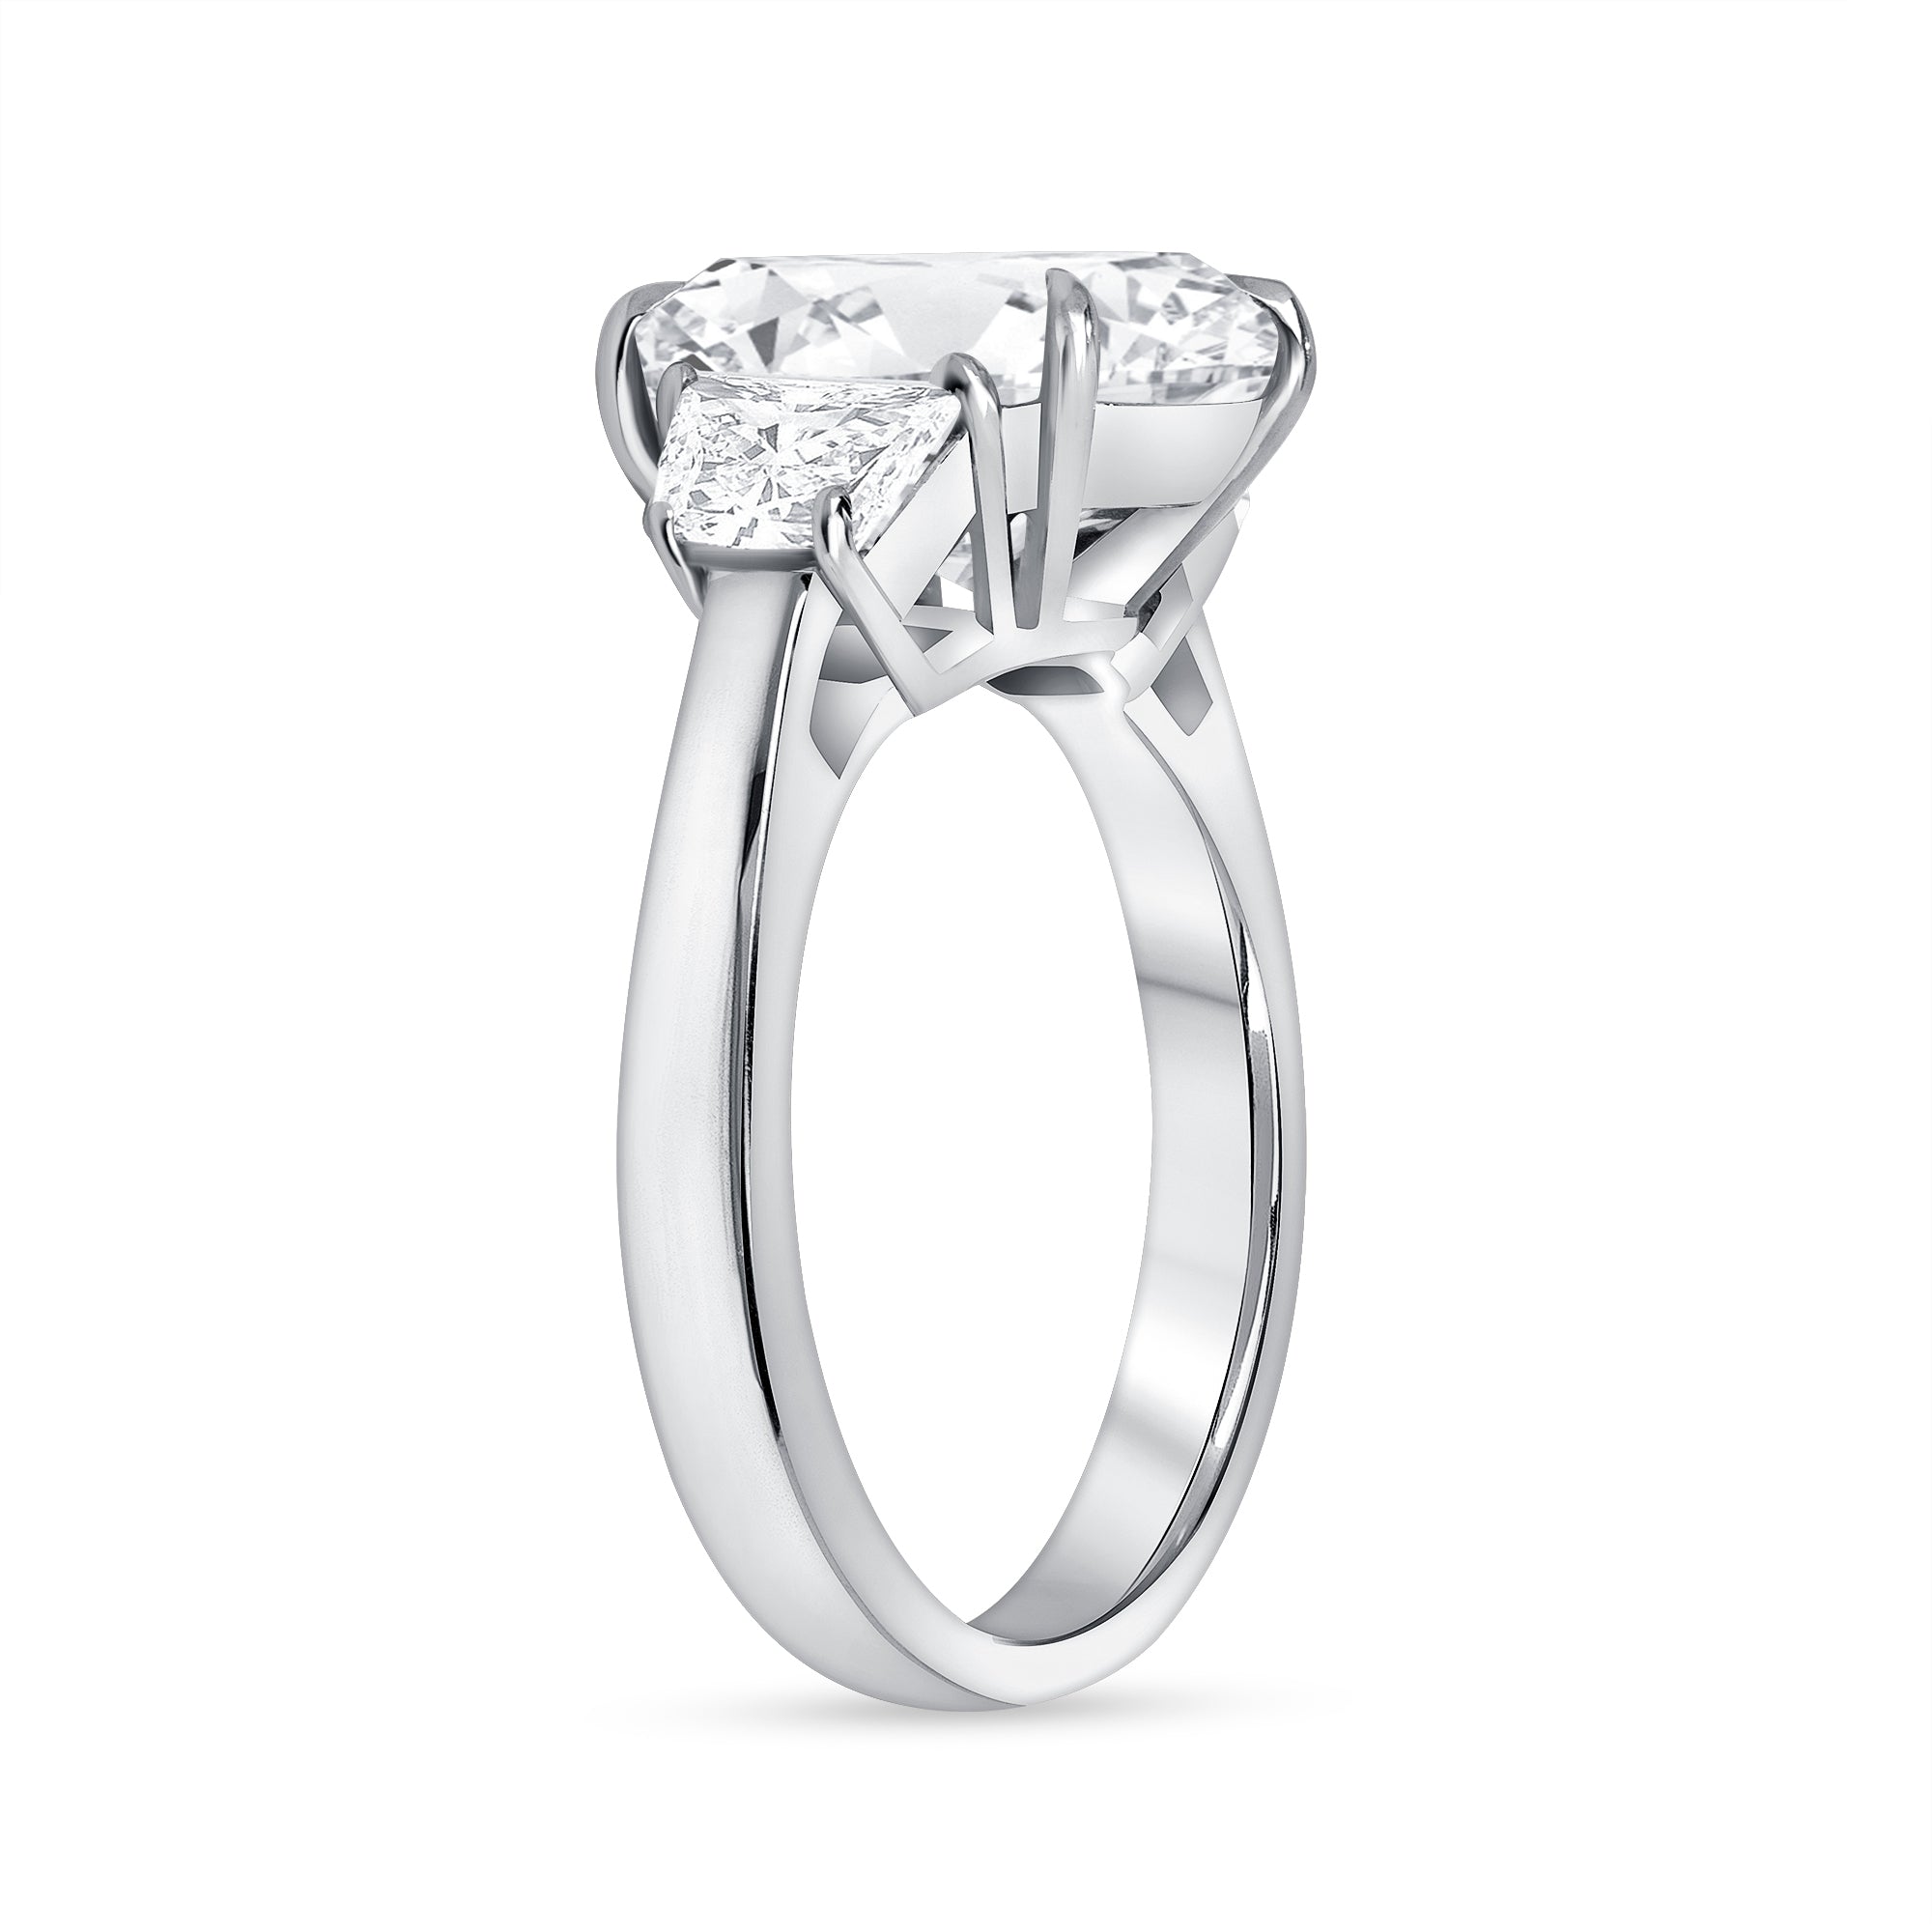 4.05ct Cushion Cut Diamond Three Stone Ring with Trapezoid Side Stones in Platinum Band, GIA Certified